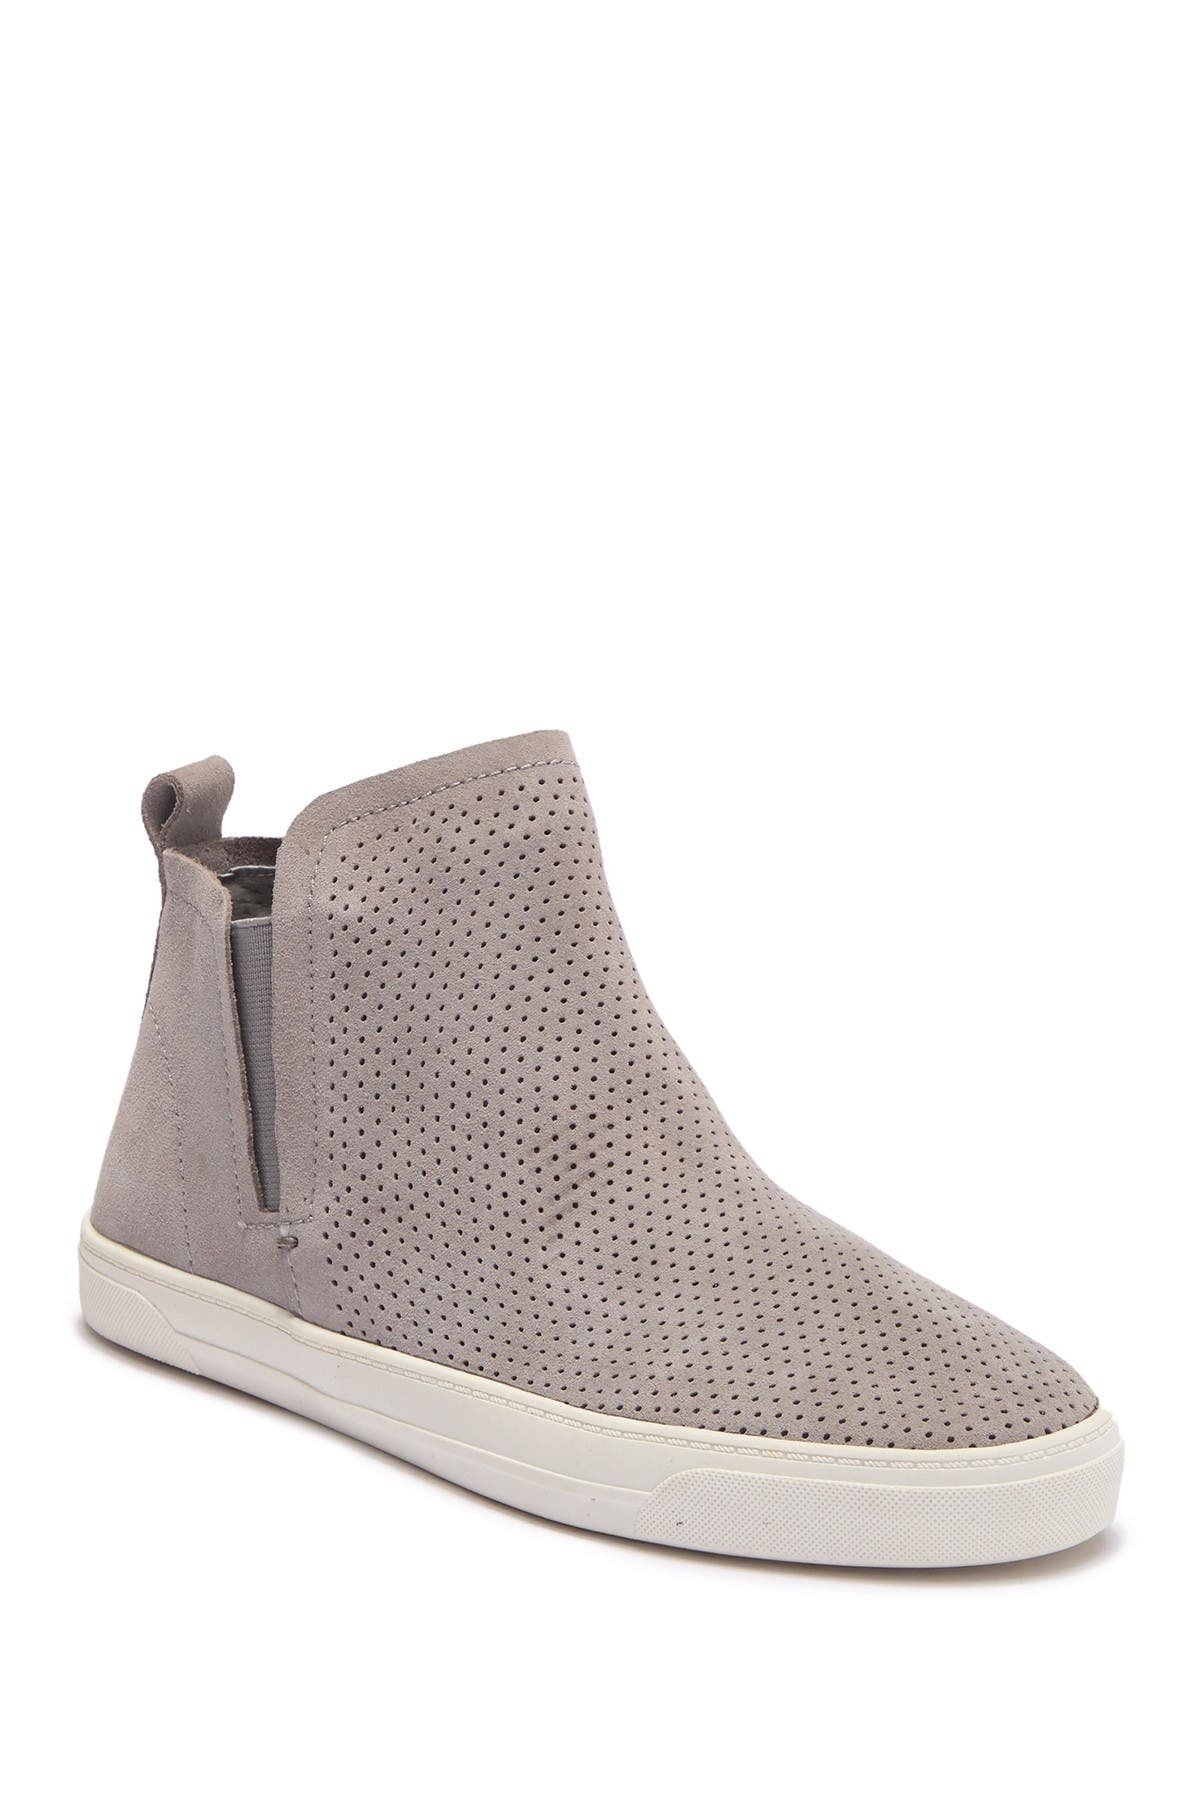 Dolce Vita | Xane Perforated Suede 